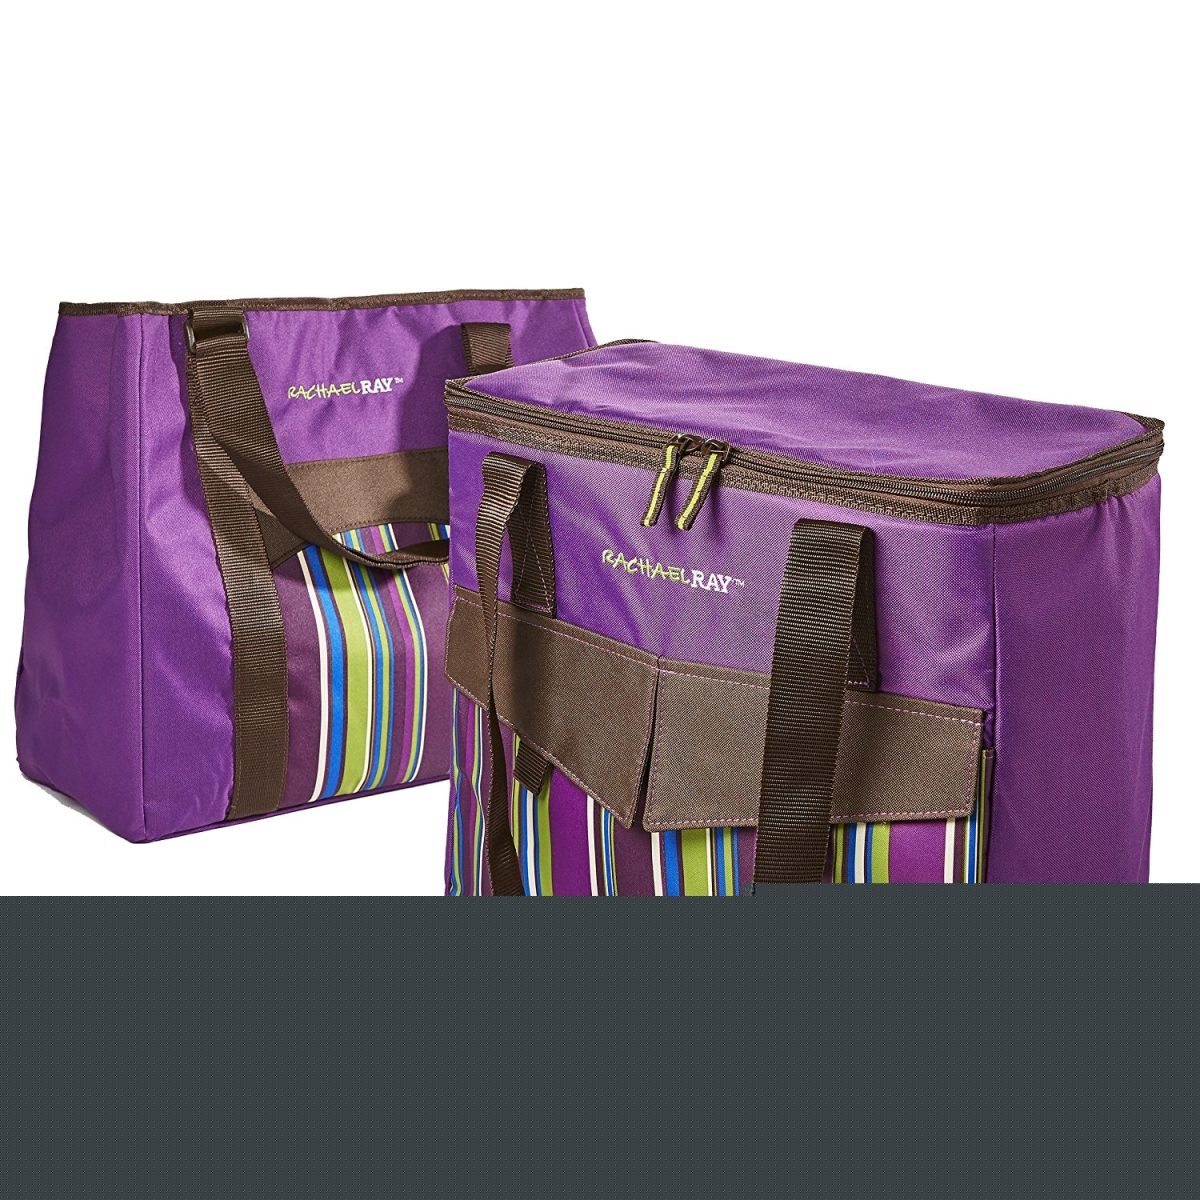 5070rr1636c Rachael Ray Chill Out 2 Go Deluxe Thermal Tote, Purple